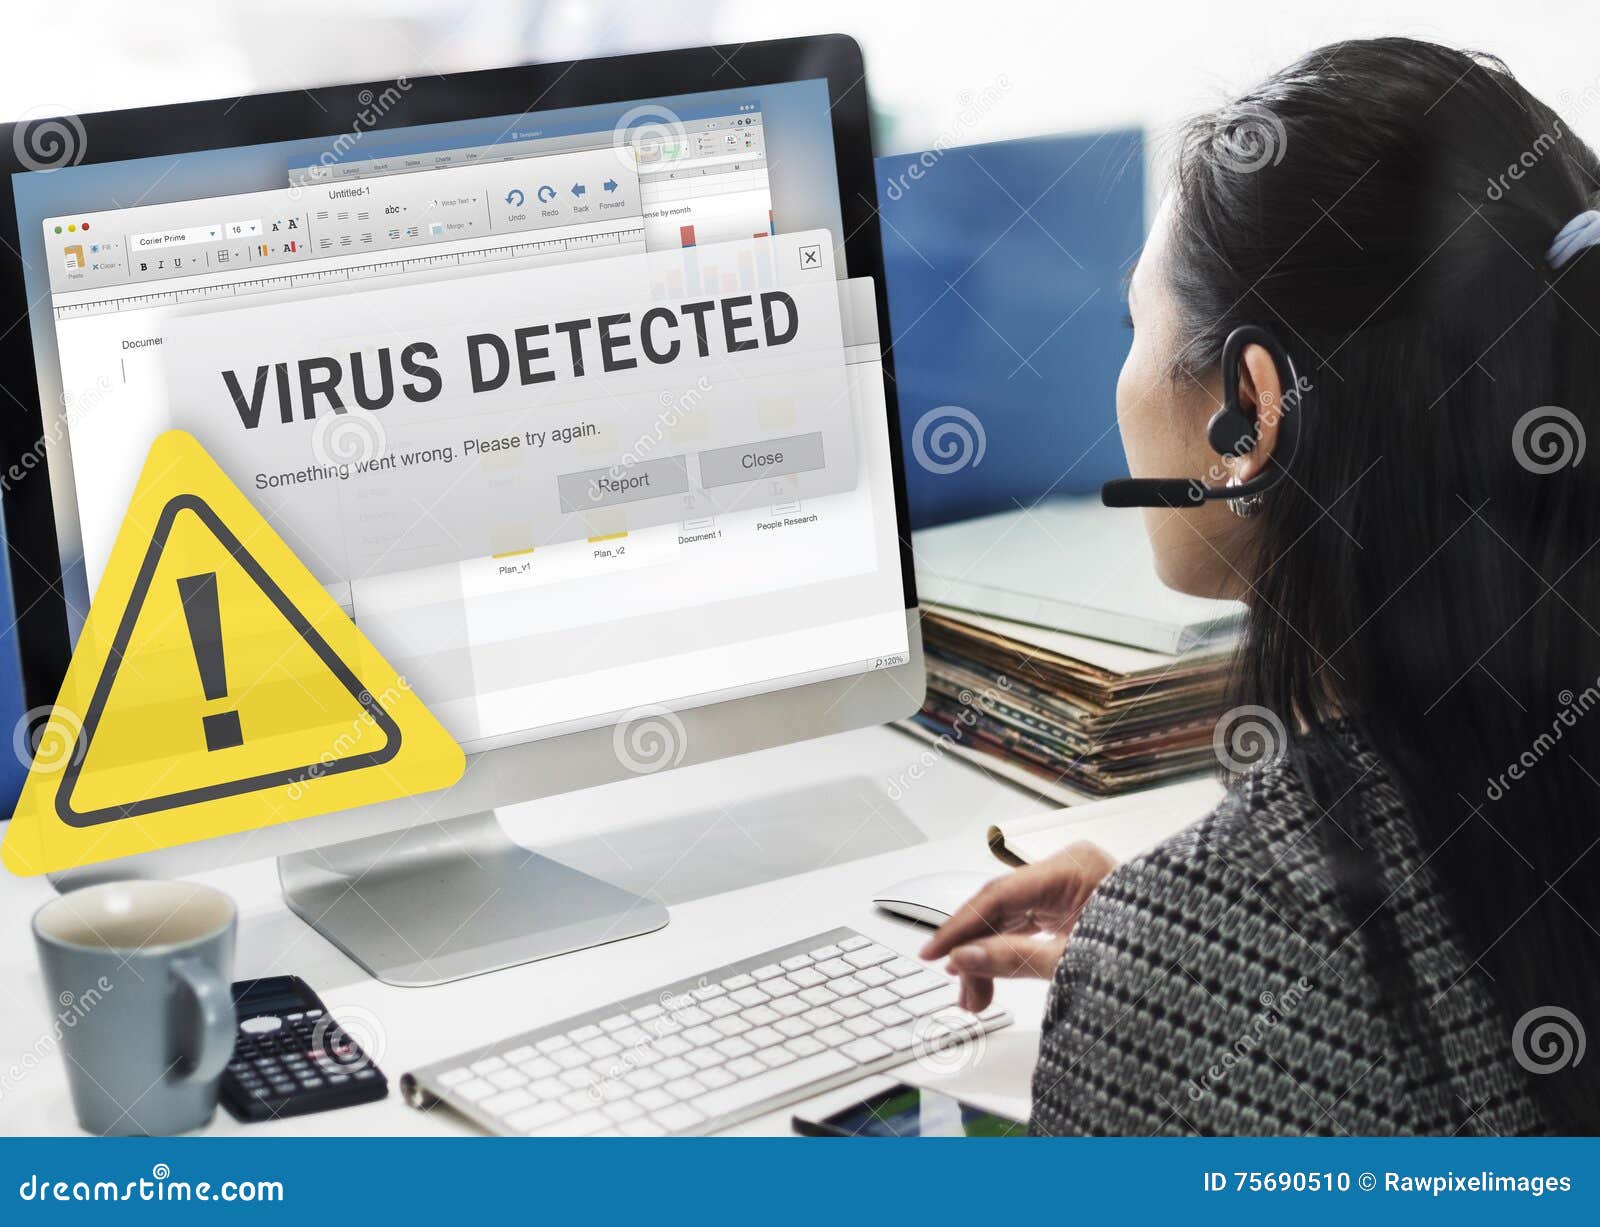 unsecured virus detected hack unsafe concept